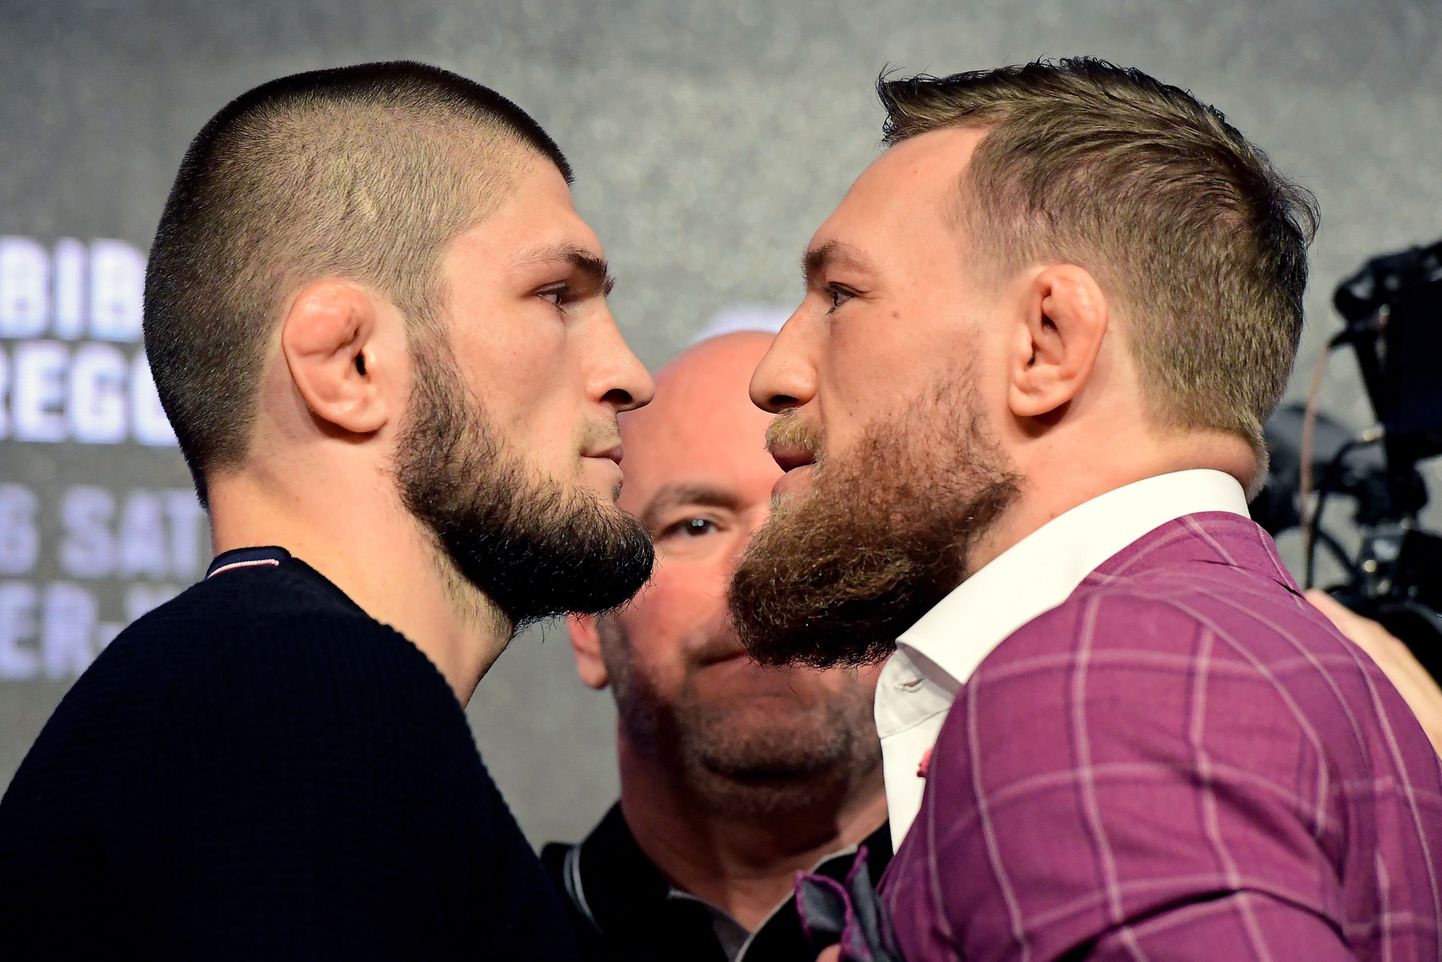 NEW YORK, NY - SEPTEMBER 20: Lightweight champion Khabib Nurmagomedov faces-off with Conor McGregor during the UFC 229 Press Conference at Radio City Music Hall on September 20, 2018 in New York City.   Steven Ryan/Getty Images/AFP
== FOR NEWSPAPERS, INTERNET, TELCOS & TELEVISION USE ONLY ==